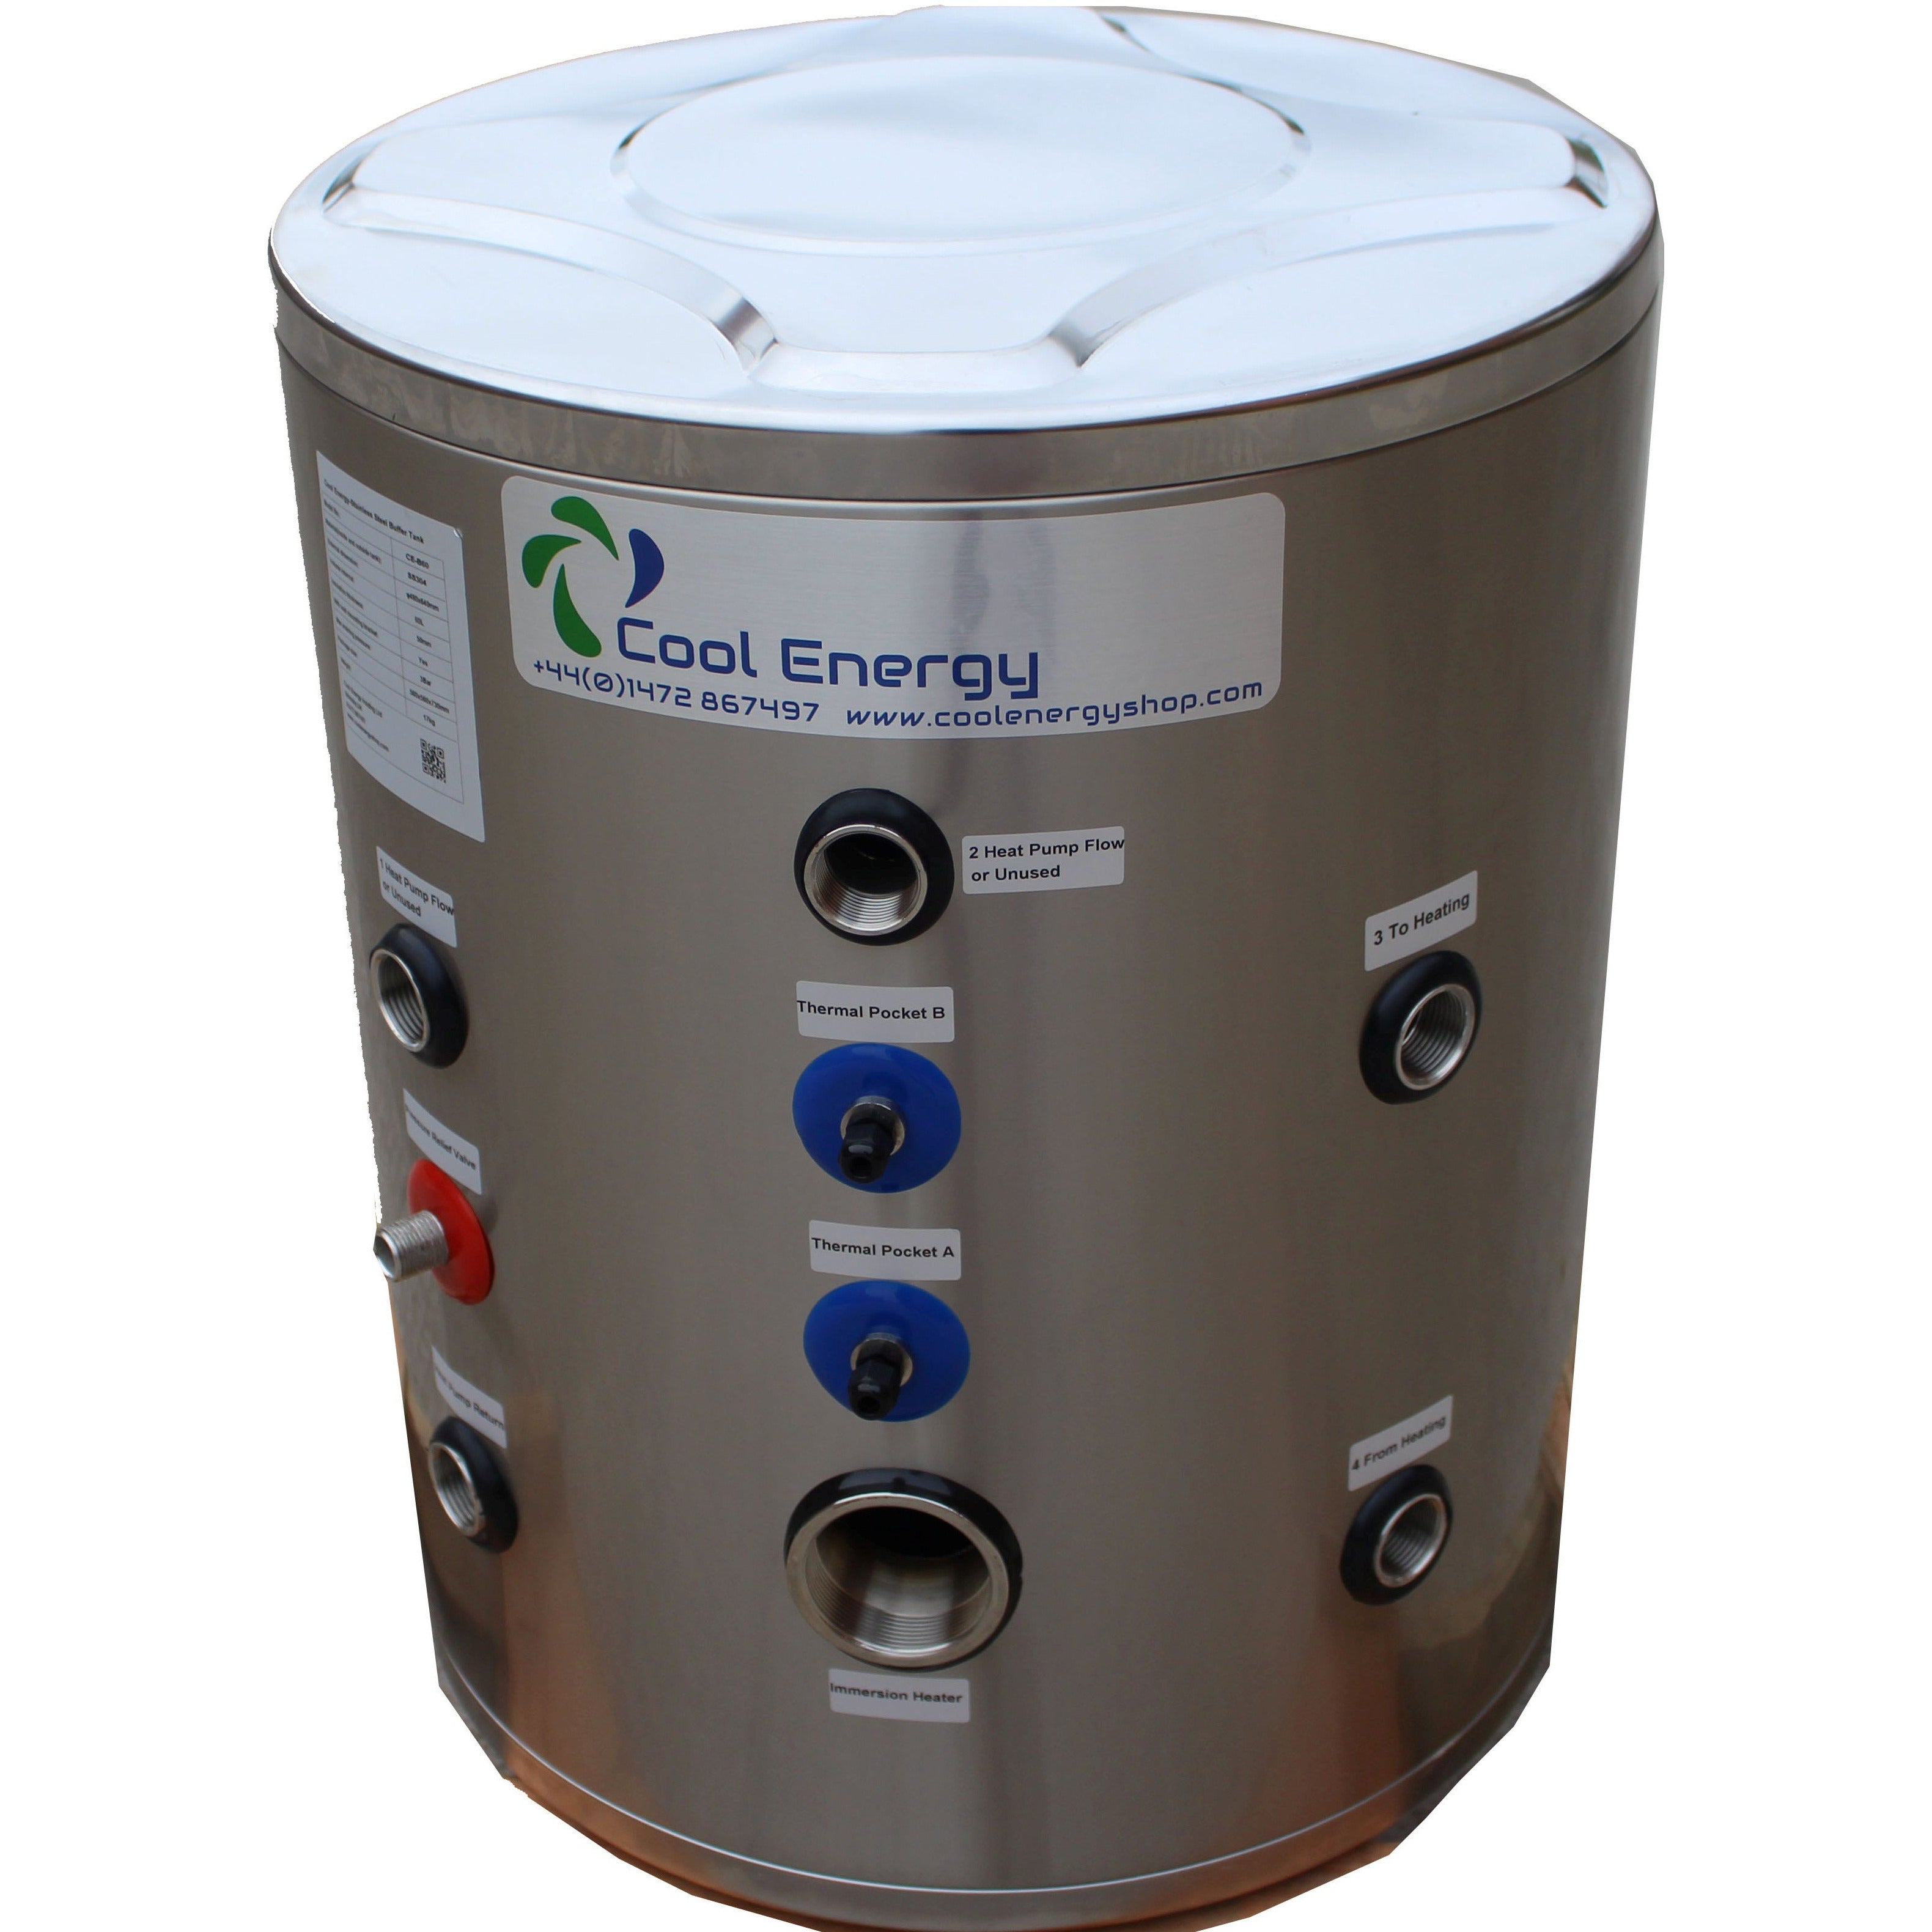 Cool Energy 60L Stainless Buffer Tank CE-B60 - Buffer Tanks & Hot Water Cylinders - Cool Energy Shop